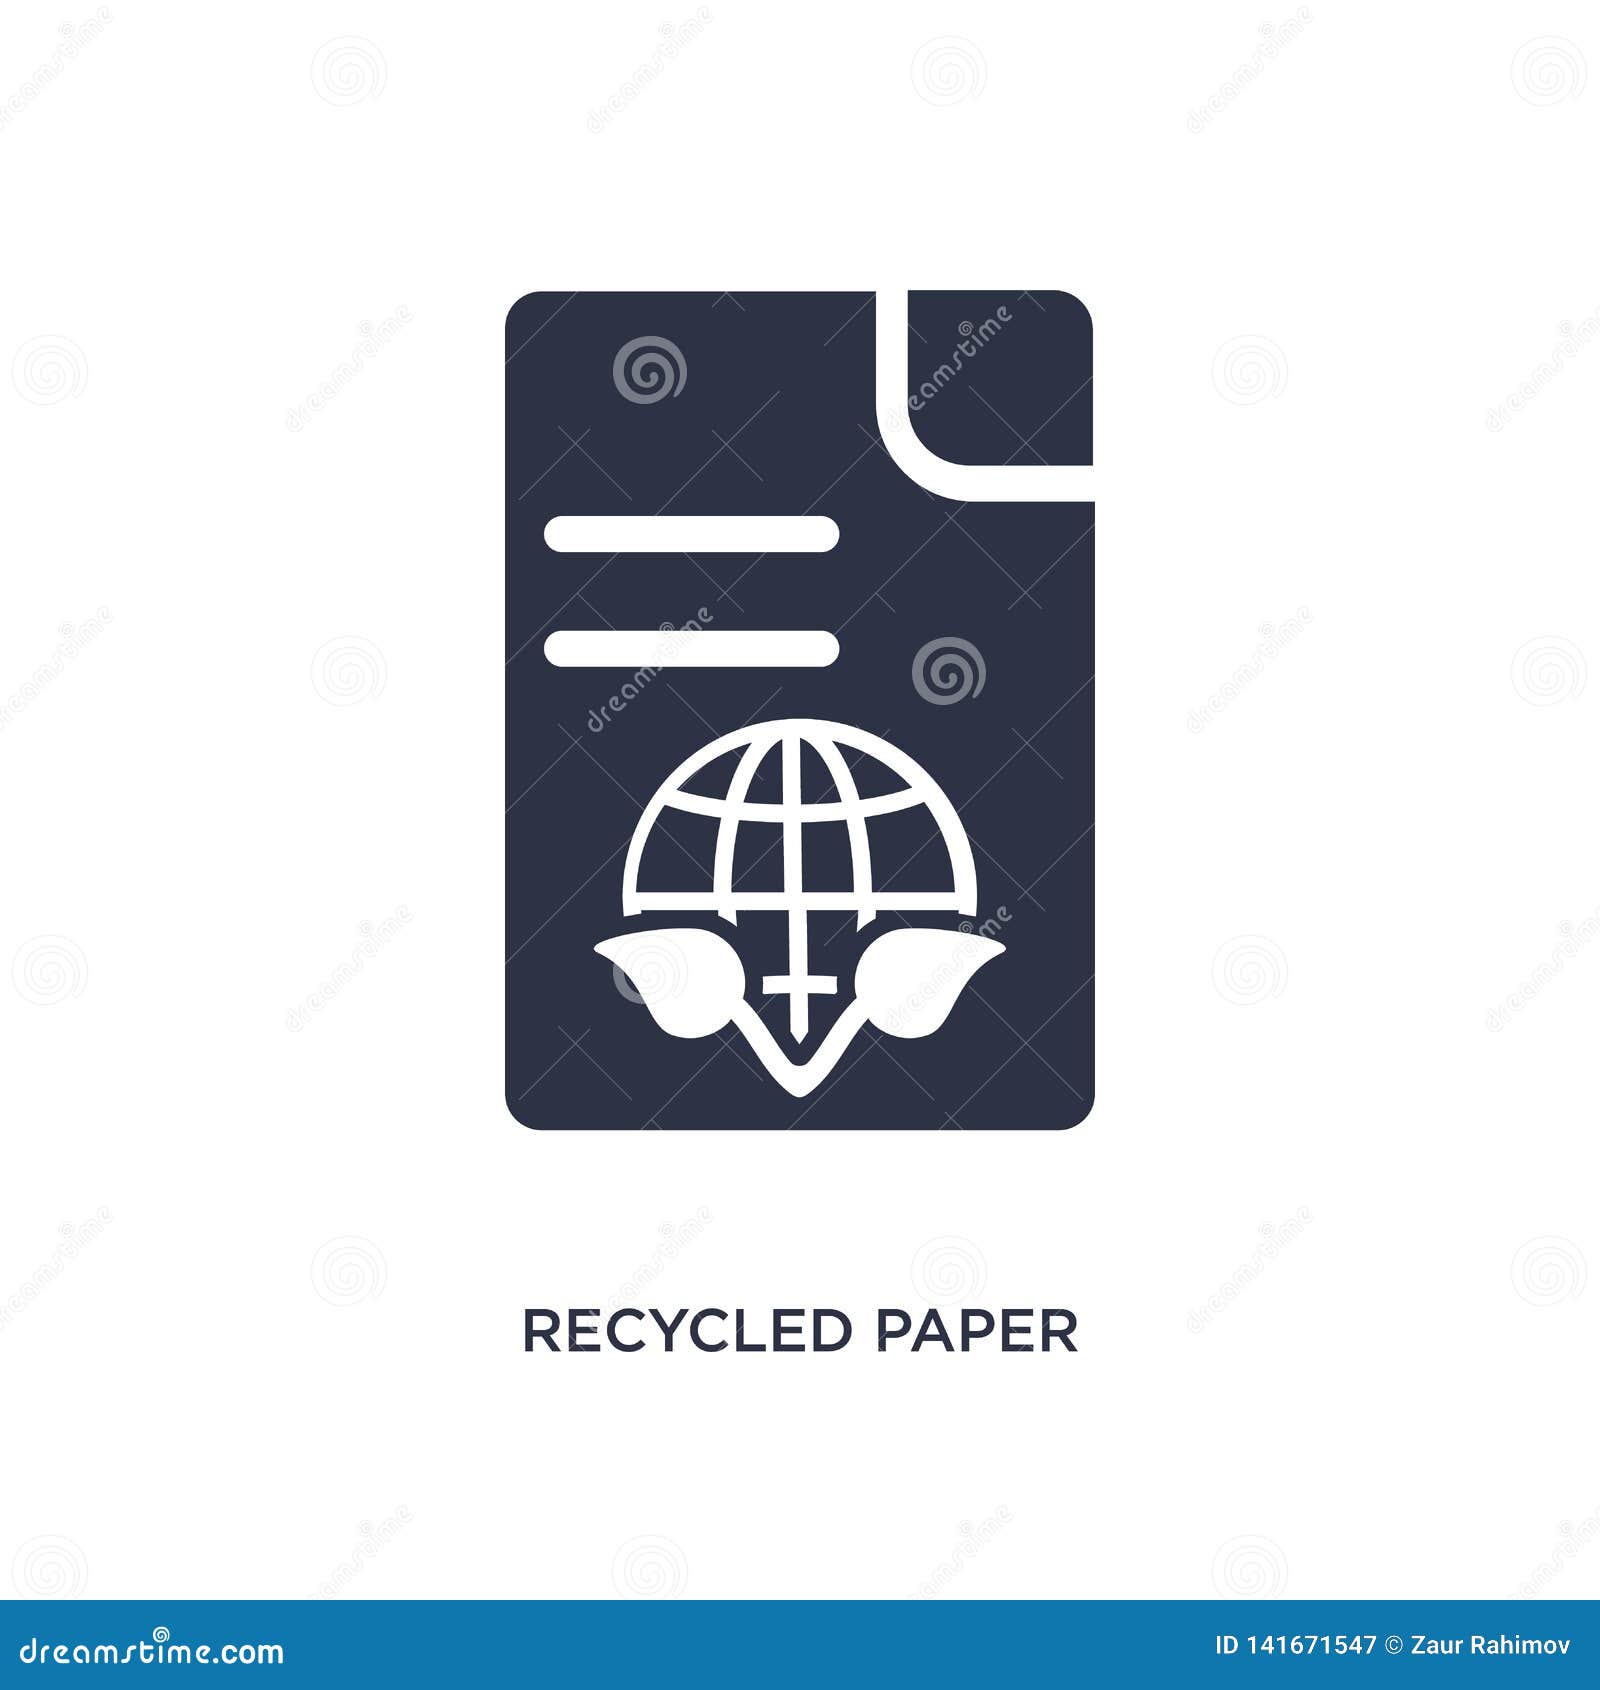 Download Recycled Paper Icon On White Background Simple Element Illustration From Ecology Concept Stock Vector Illustration Of Texture Cardboard 141671547